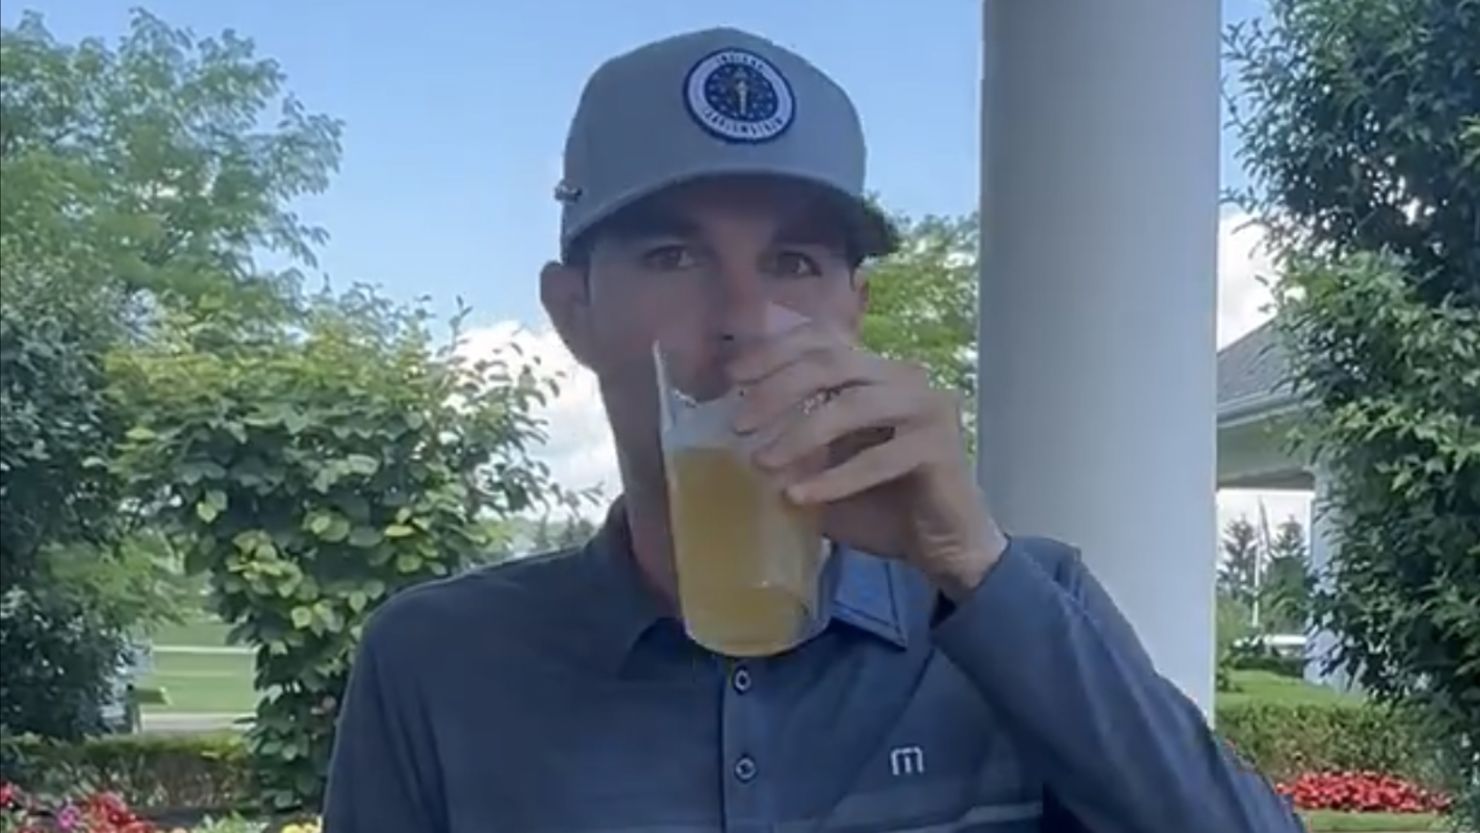 Nick Bienz sips a beer before heading into a playoff to qualify for the PGA Tour's Rocket Mortgage Classic, in a video shared by Ryan French of Monday Q Info on X, formerly known as Twitter.